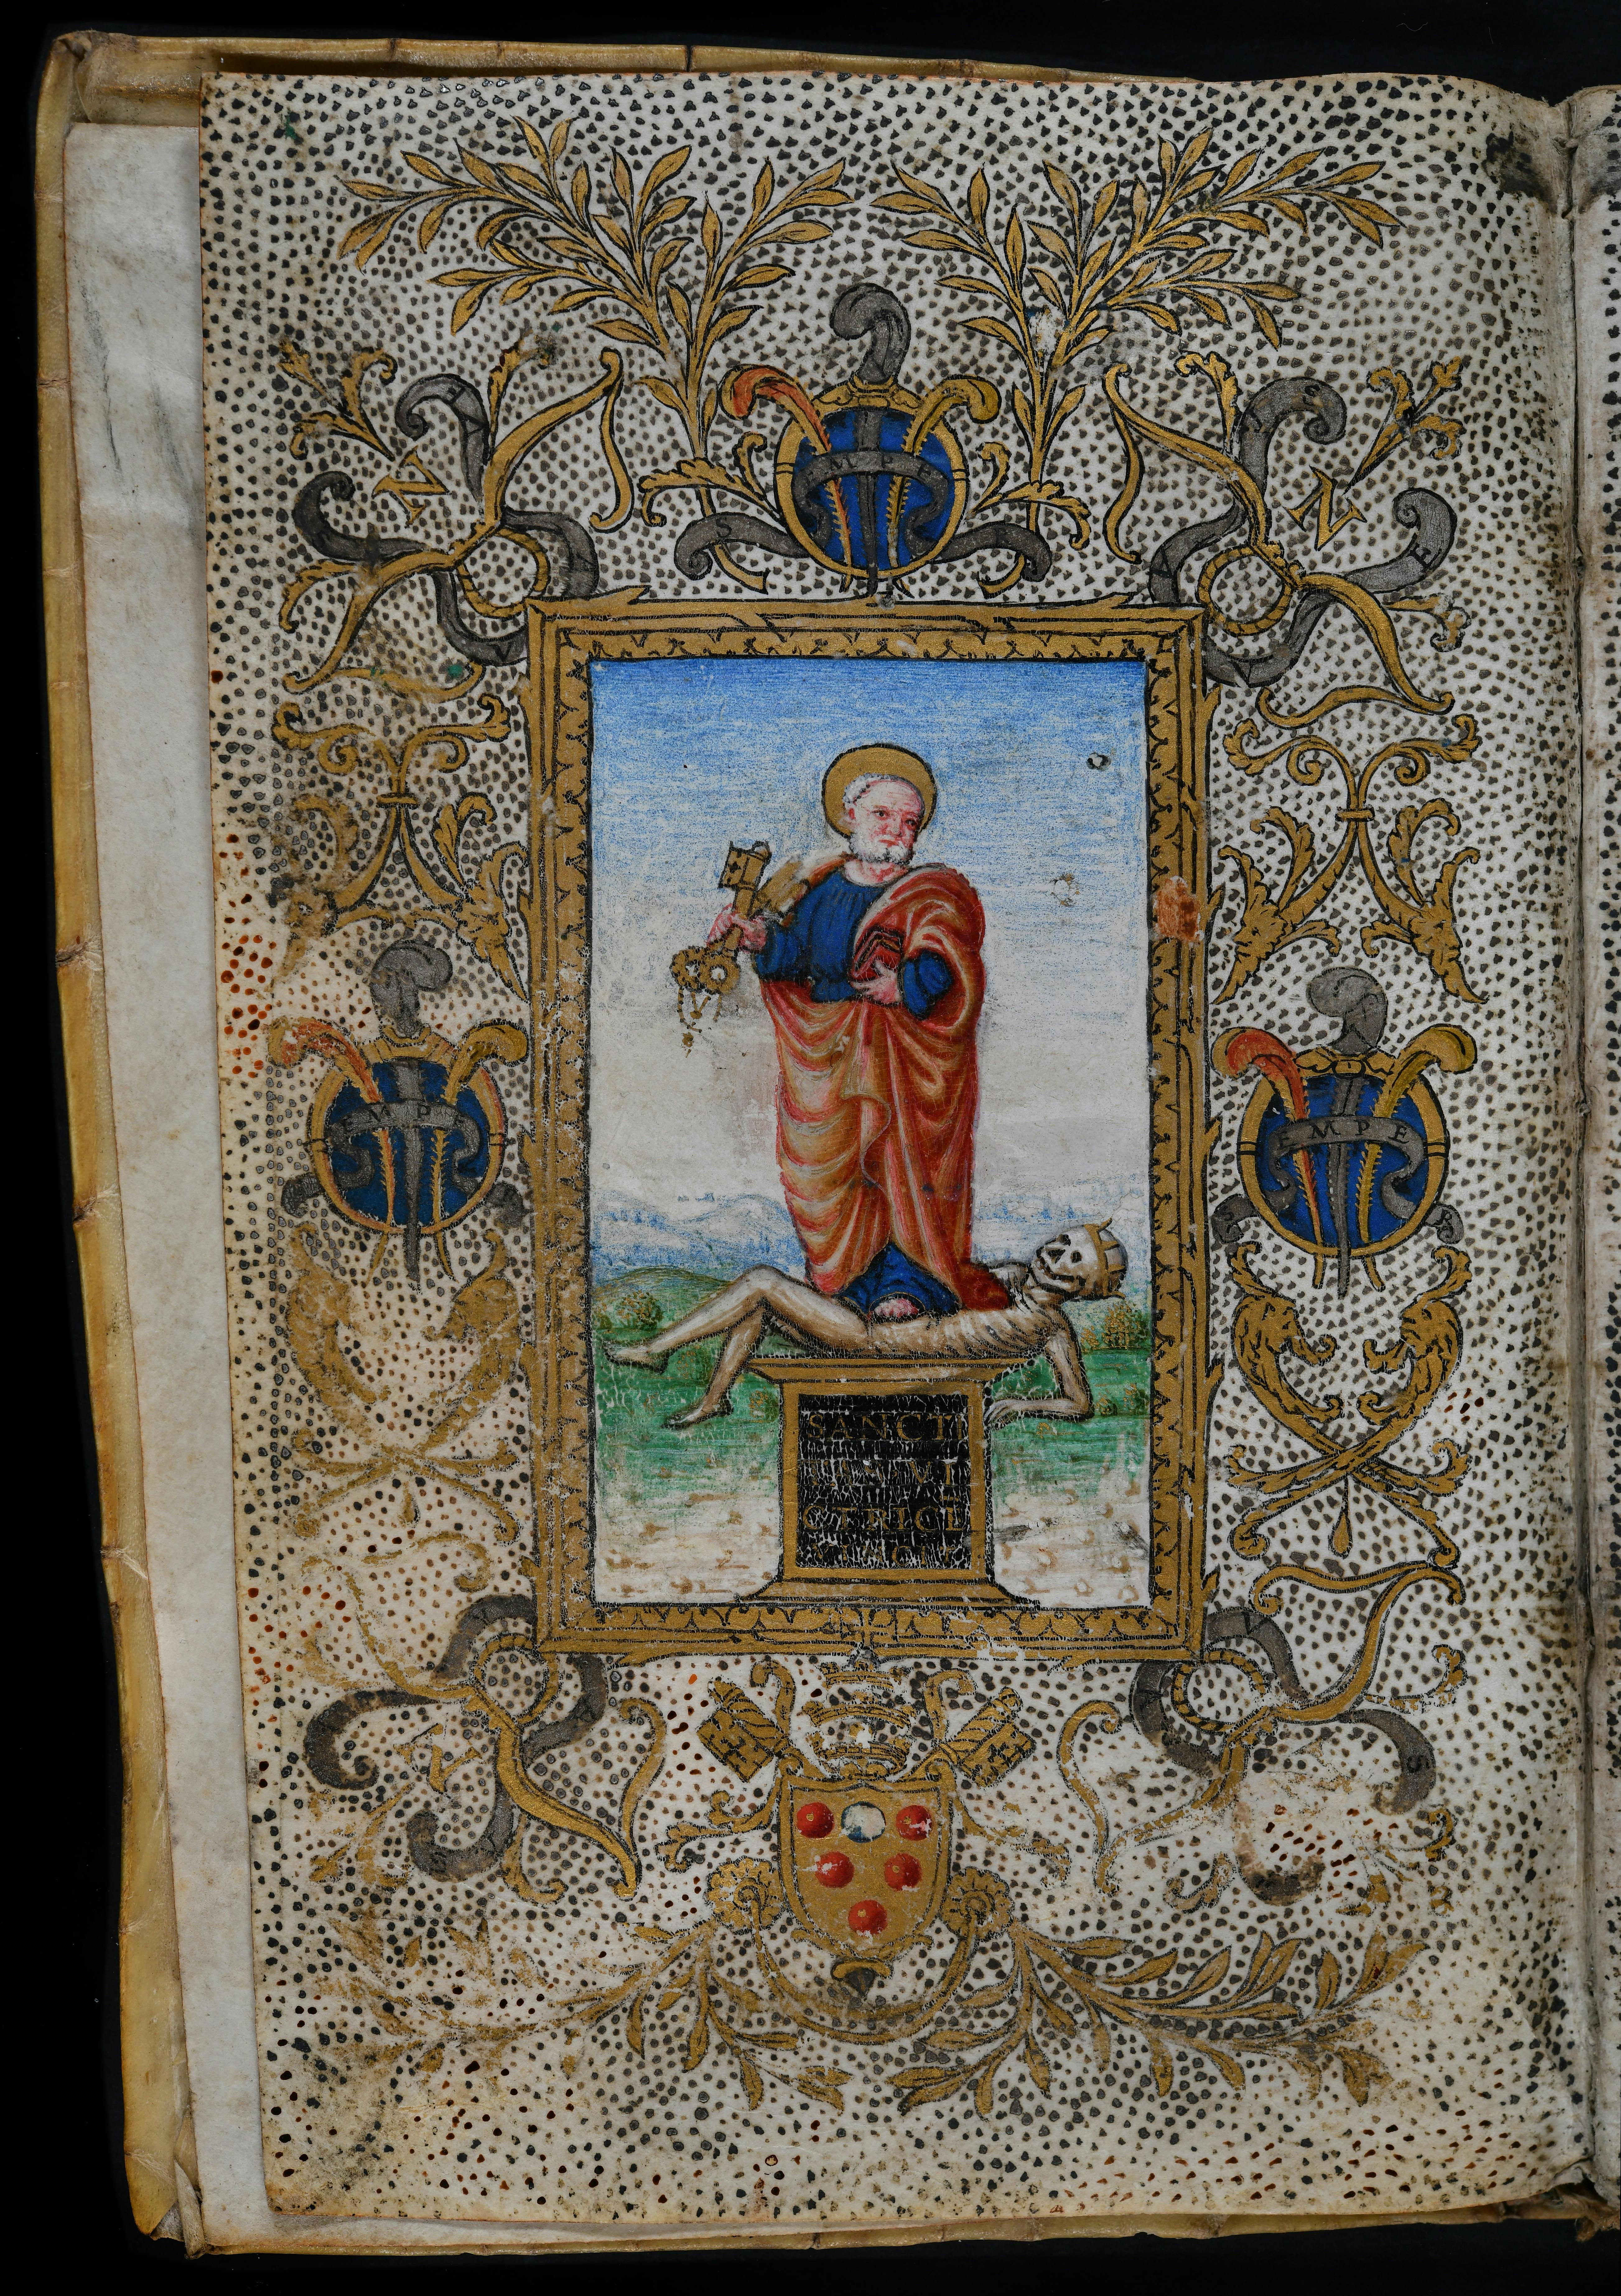 Stories of Painted Pages. Manuscripts and Illuminations Recovered by the Florentine Cultural Heritage Protection Unit